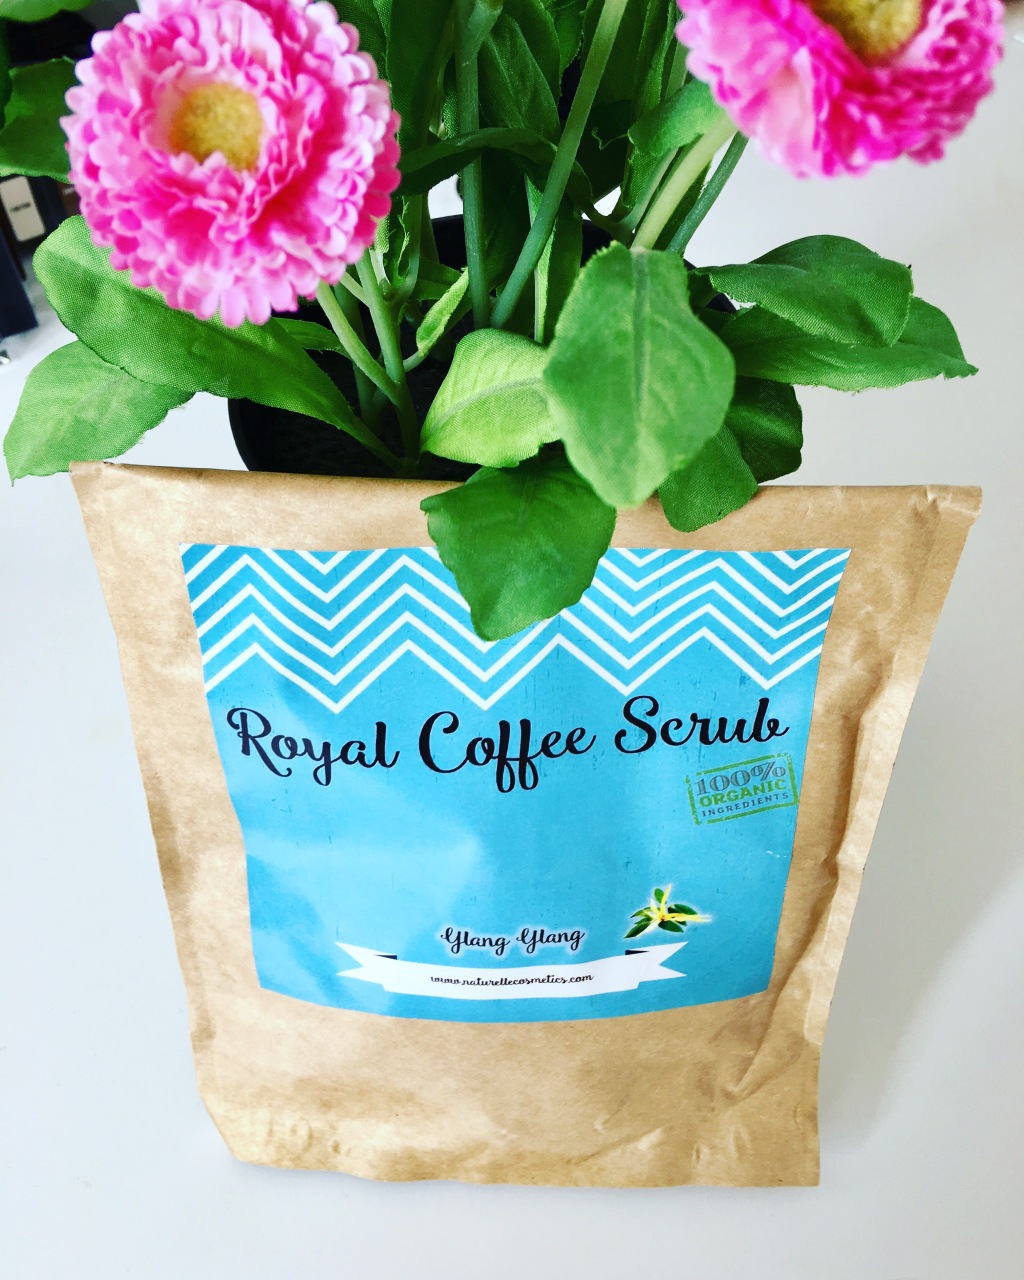 Getting Summer ready with Naturelle Cosmetics Royal Coffee Scrub